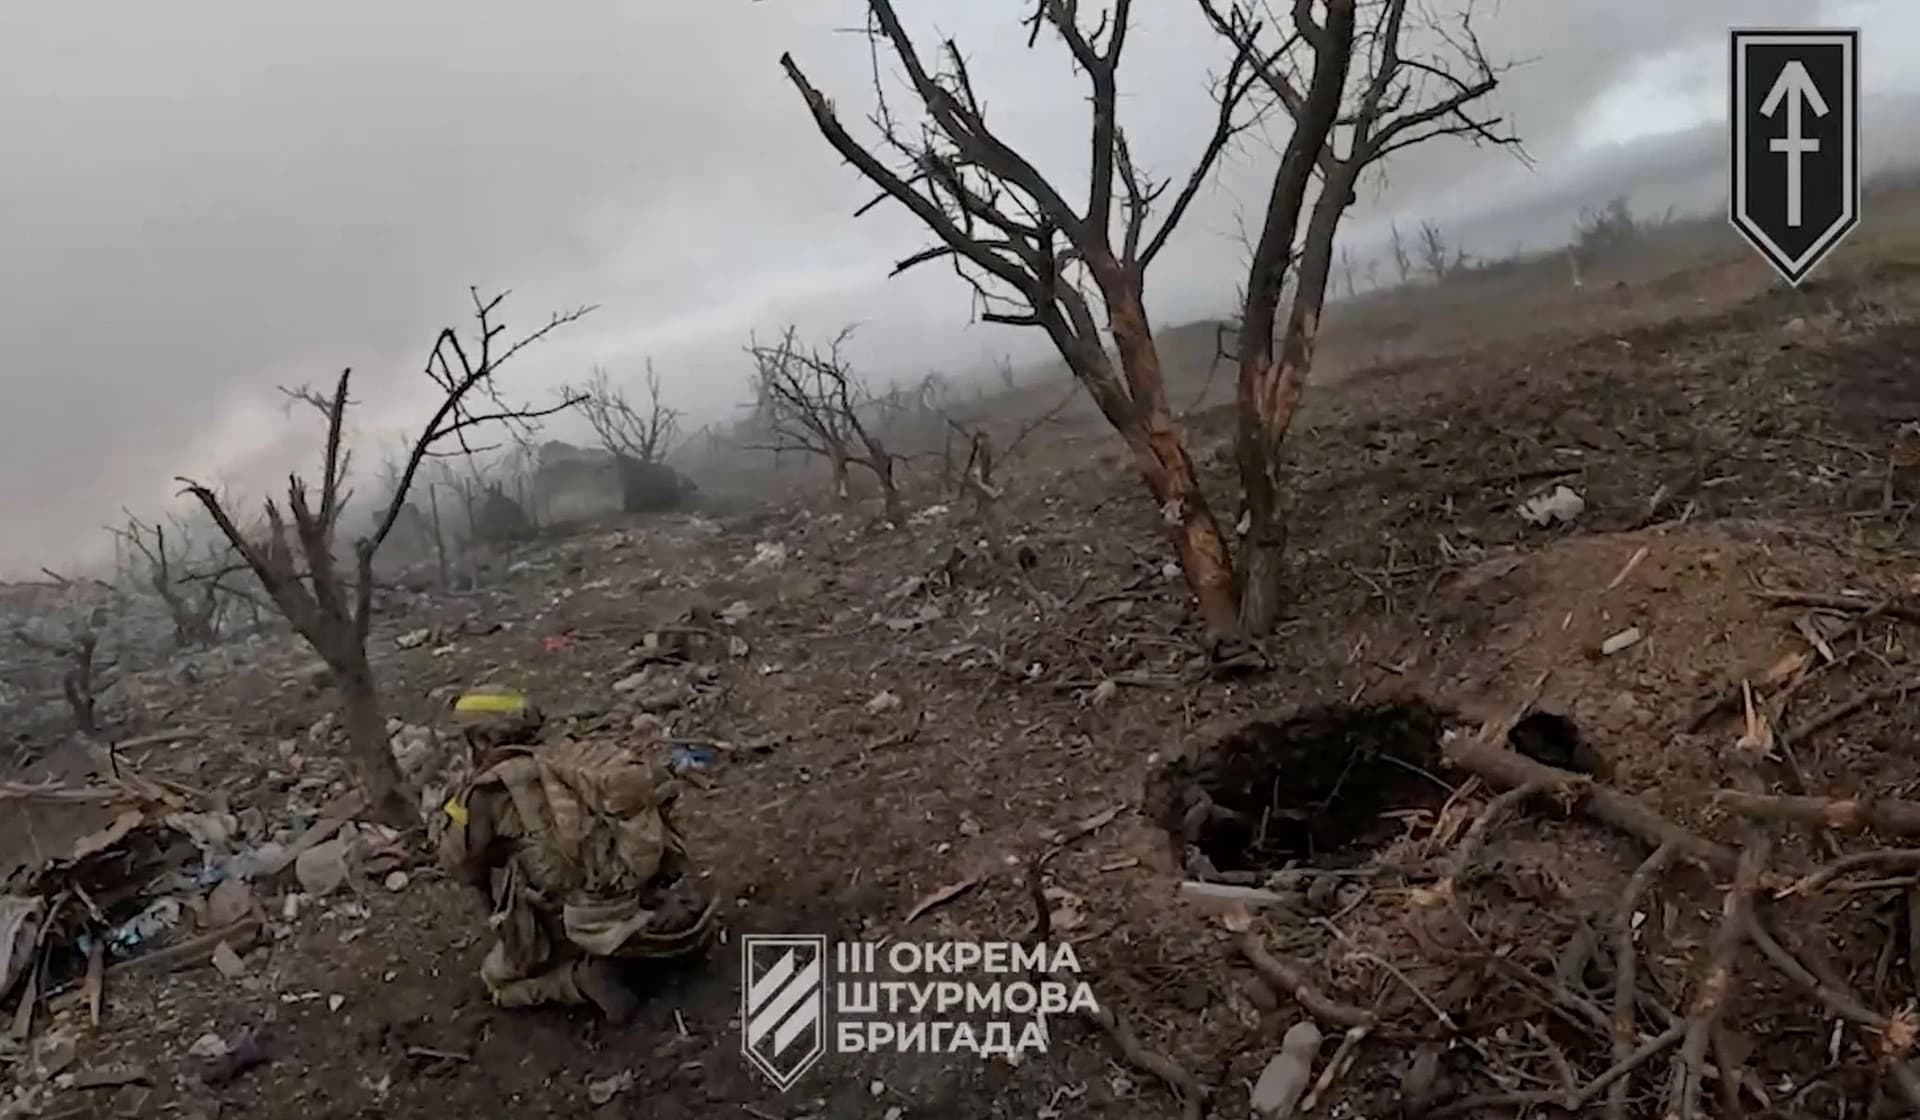 A Ukrainian soldier during the purported liberation of Andriivka